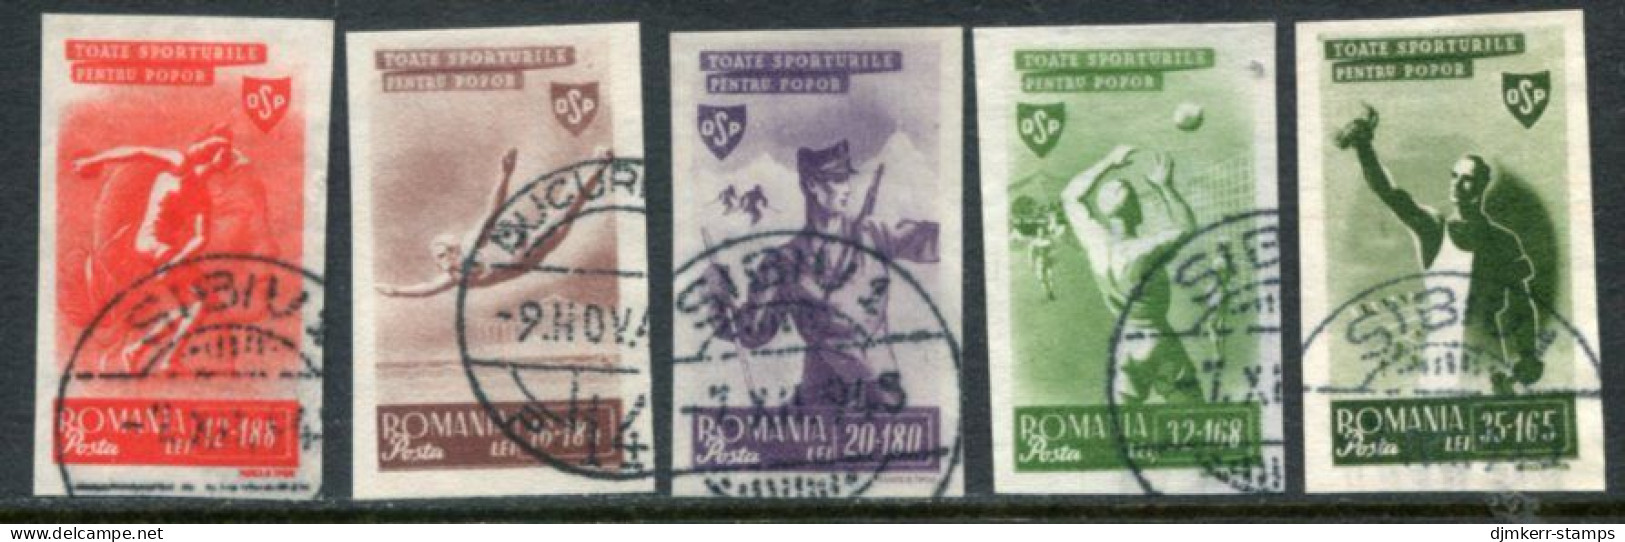 ROMANIA 1945 People's Sport Imperforate Used. Michel 879-83 - Used Stamps